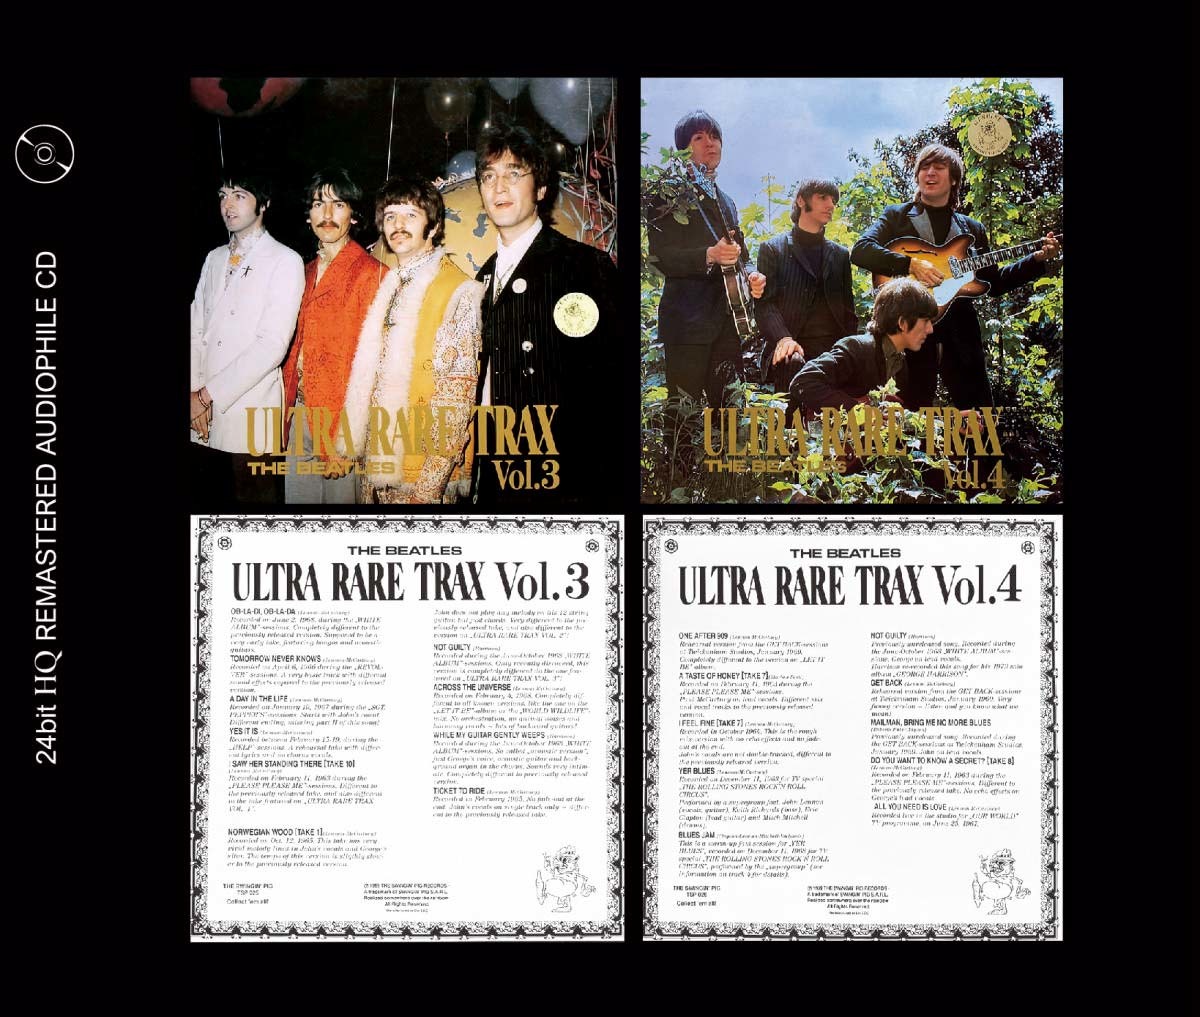 THE BEATLES / ULTRA RARE TRAX - MASTER COLLECTION Ⅱ:VOL.3&4 (RIVISED EDITION) 24bit HQ REMASTERED RETROSPECTIVE Collection【1CD】_画像4